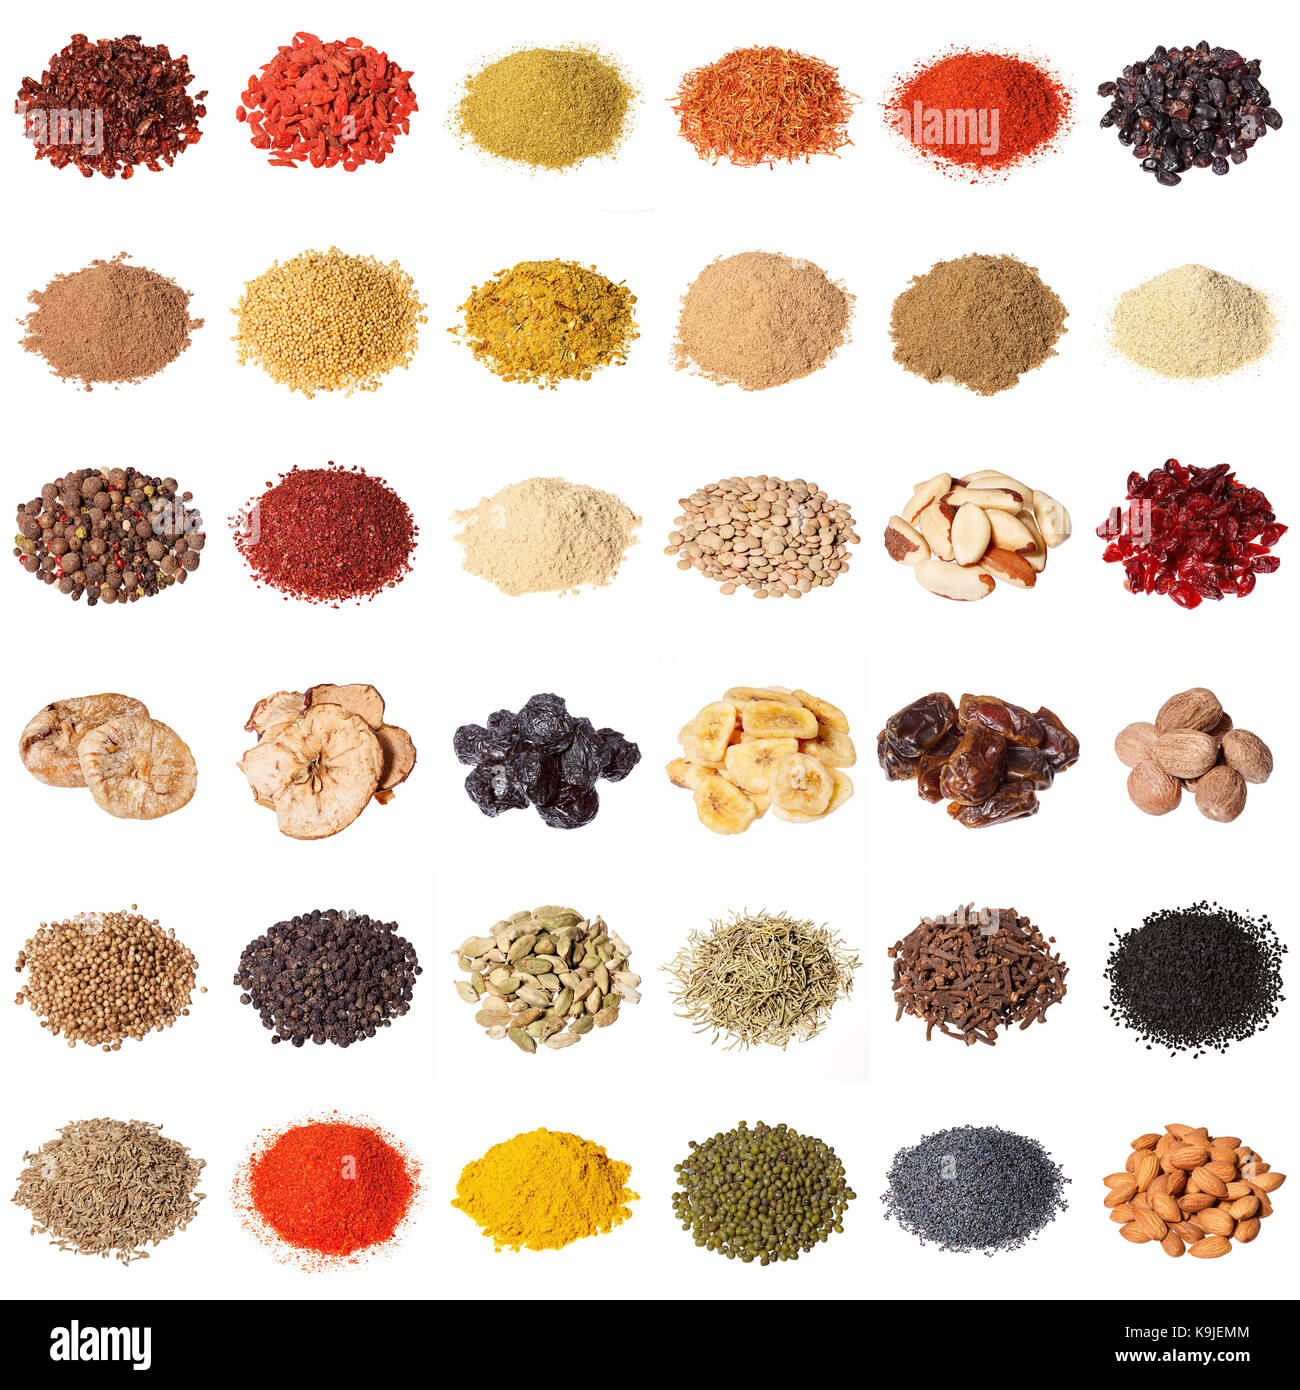 Large collection of different spices, herbs, nuts, dried fruits, beans, berries isolated on white background. Stock Photo